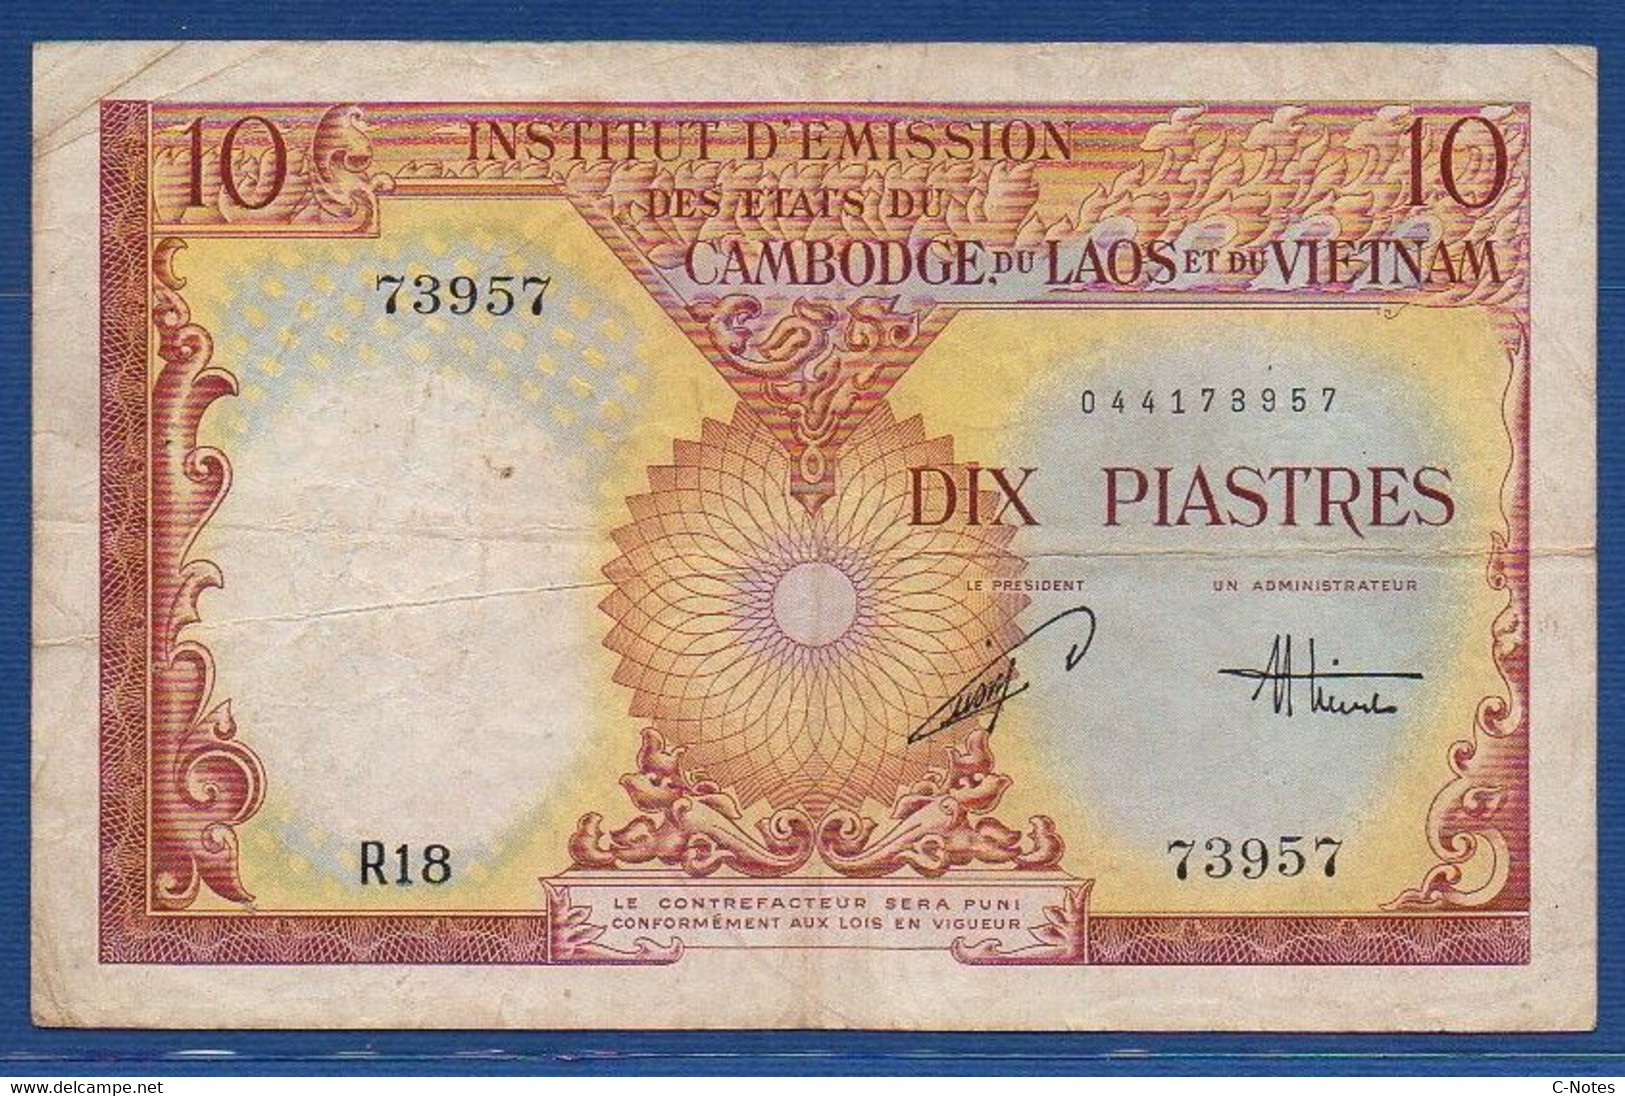 FRENCH INDOCHINA - P.107 –  10 Piastres / Dong ND (1953) F/VF, Serie R18 73957 - Indochine